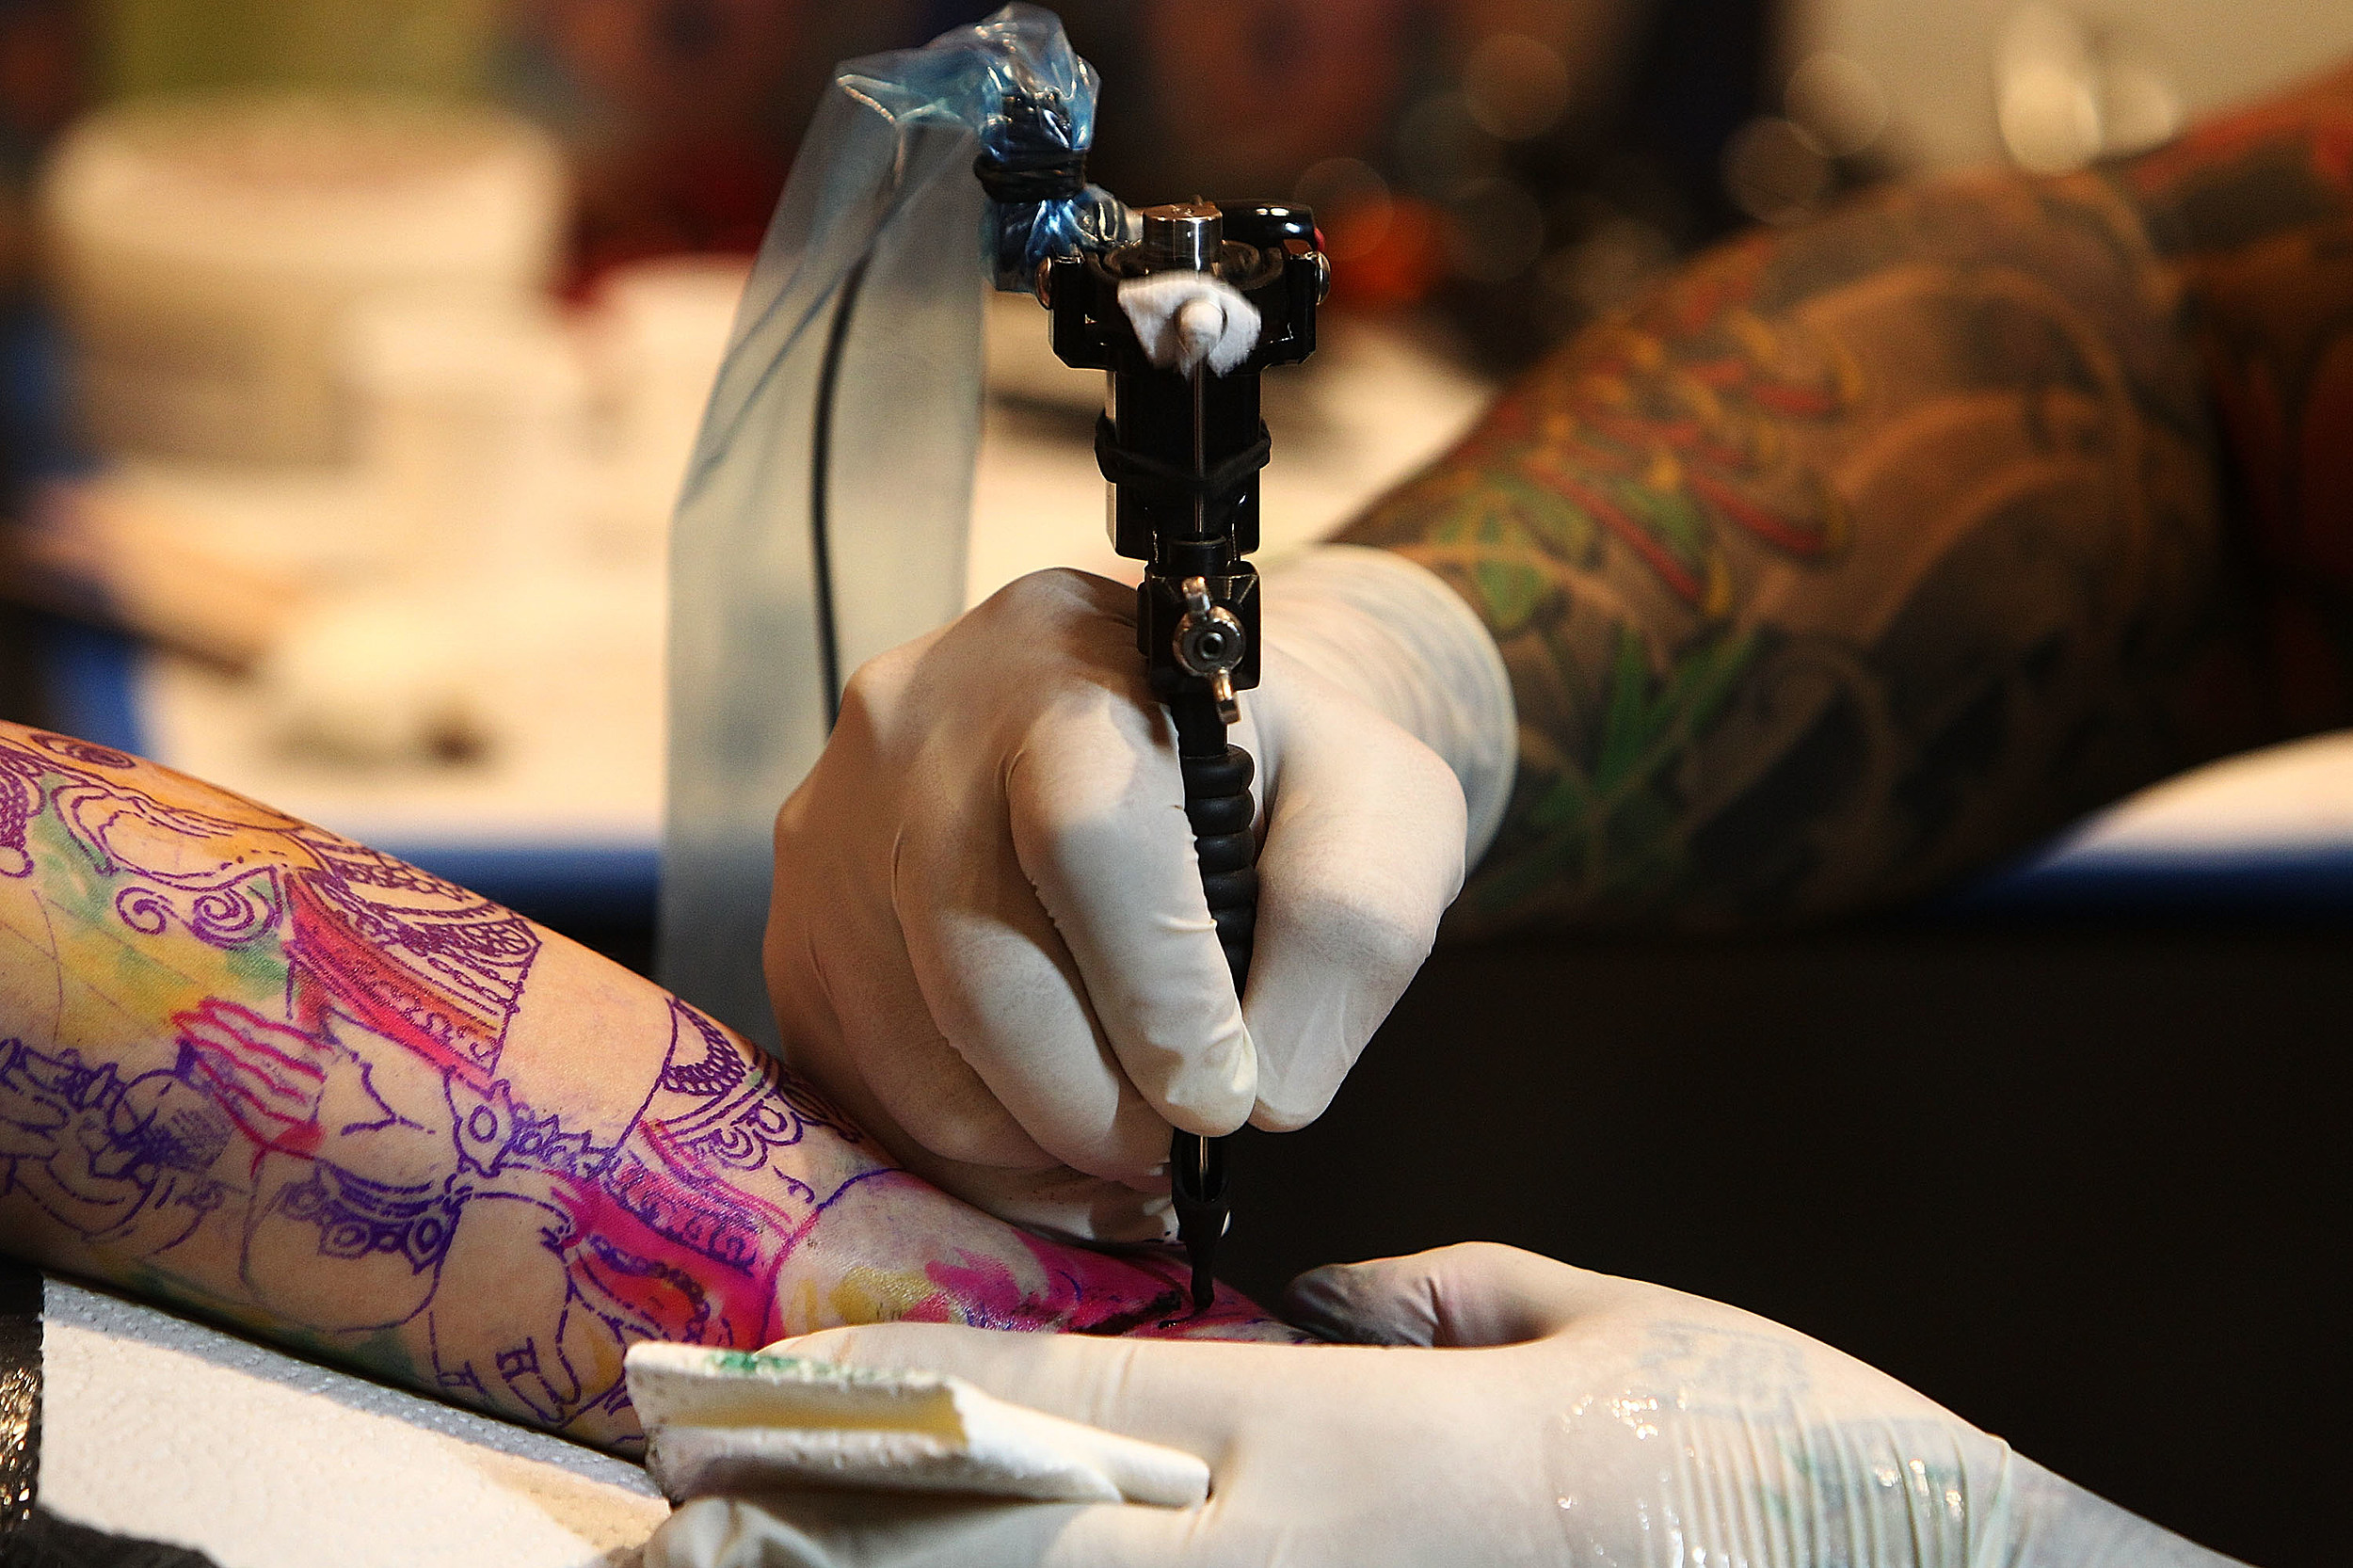 Tattoo Shops Allowed To Reopen June 22nd